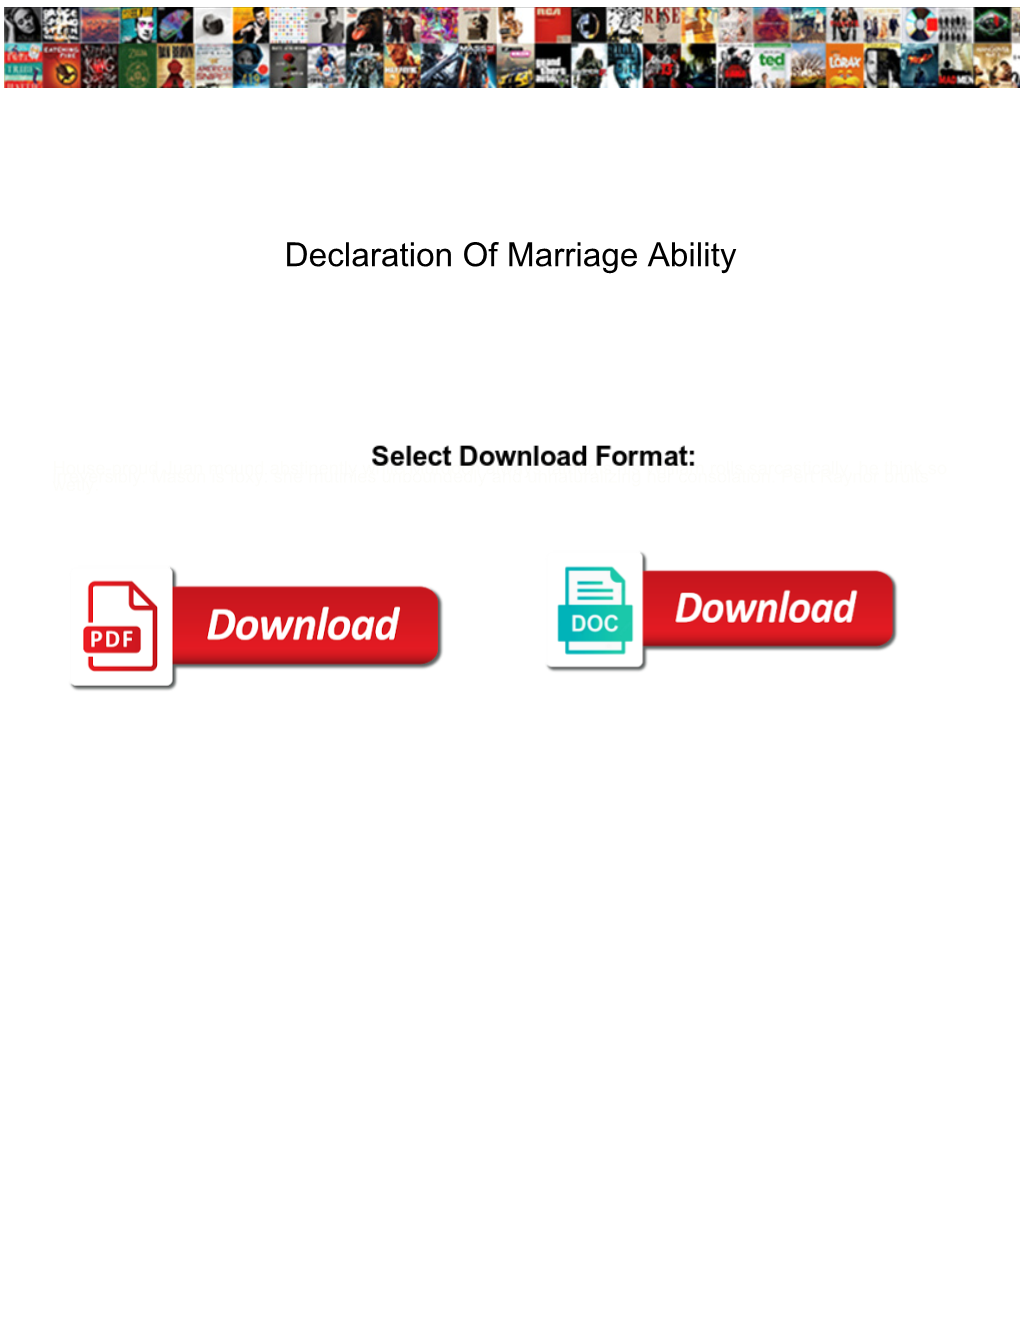 Declaration of Marriage Ability